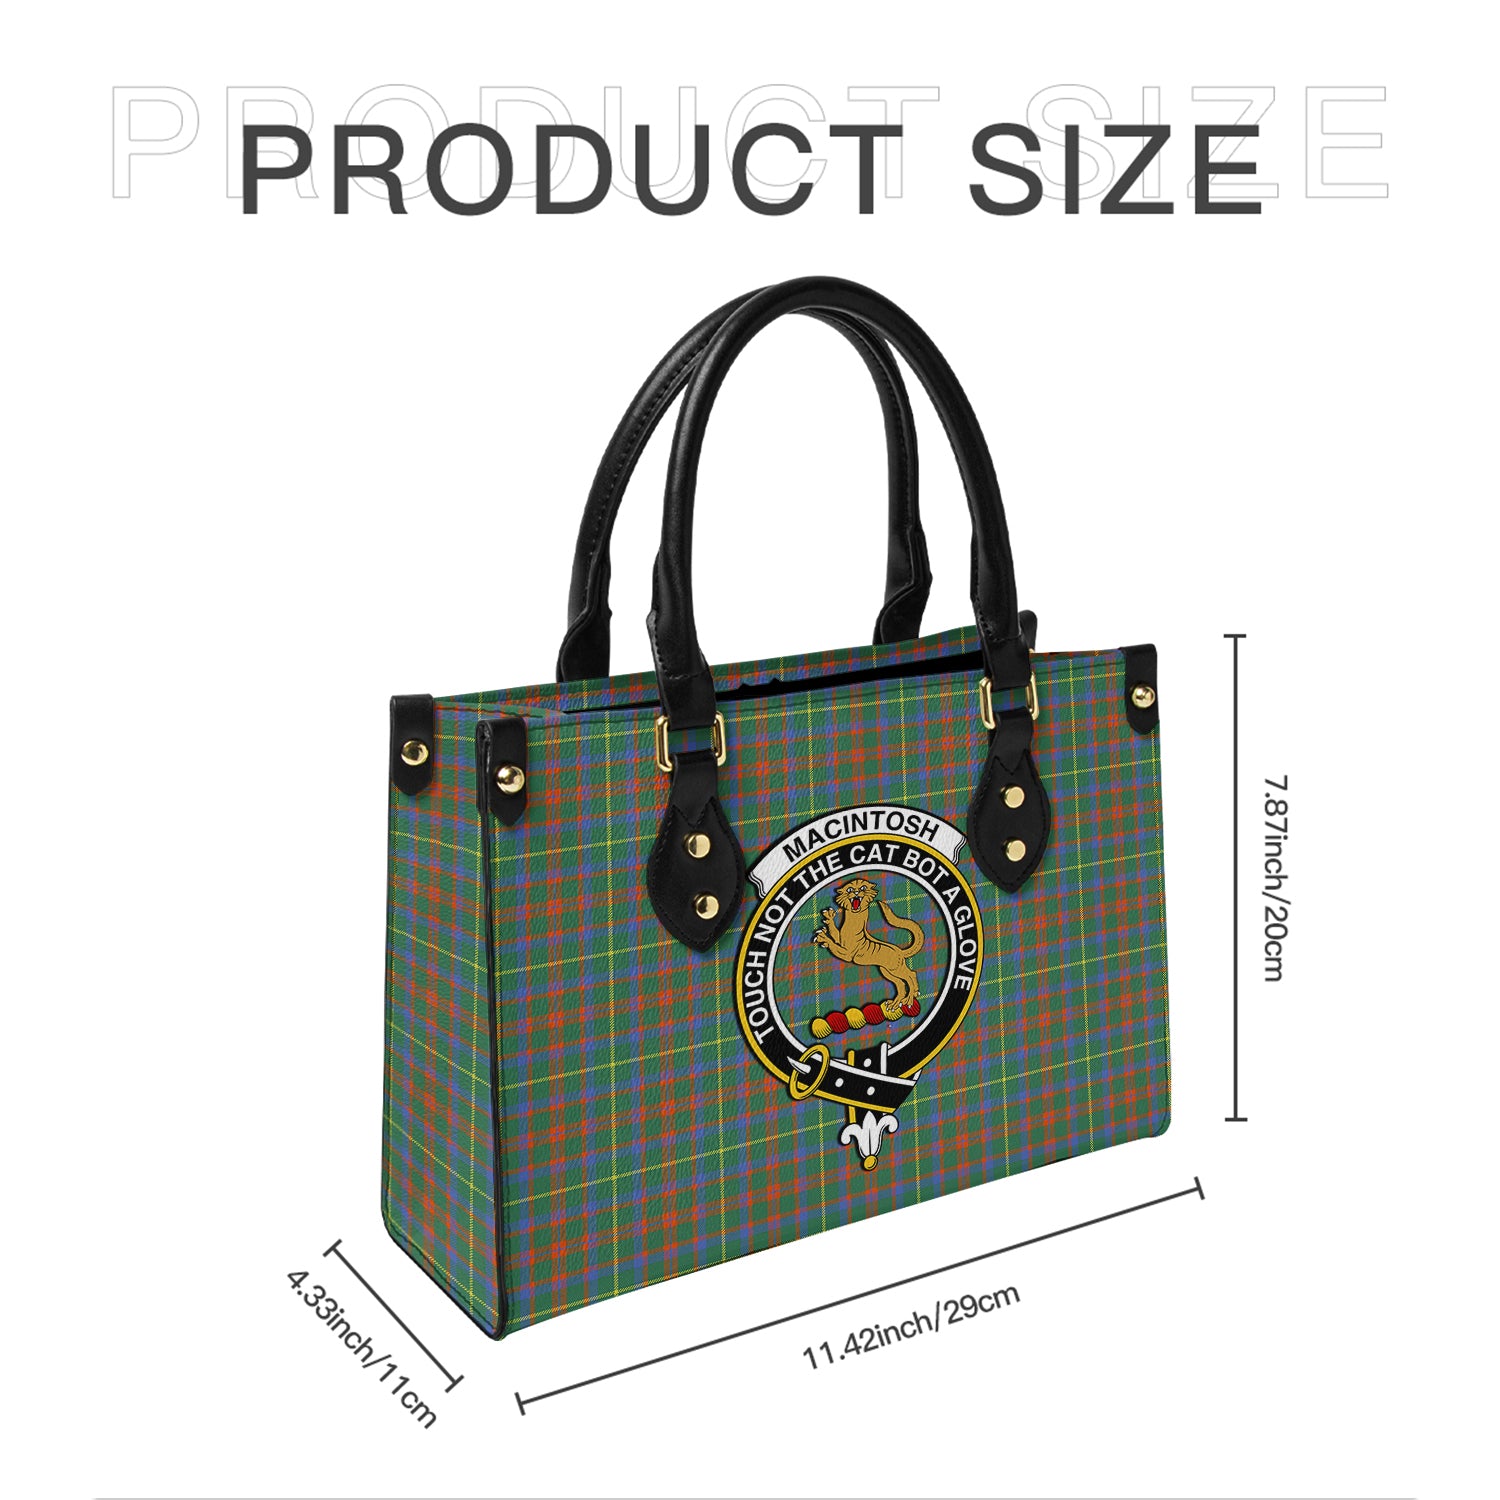 macintosh-hunting-ancient-tartan-leather-bag-with-family-crest